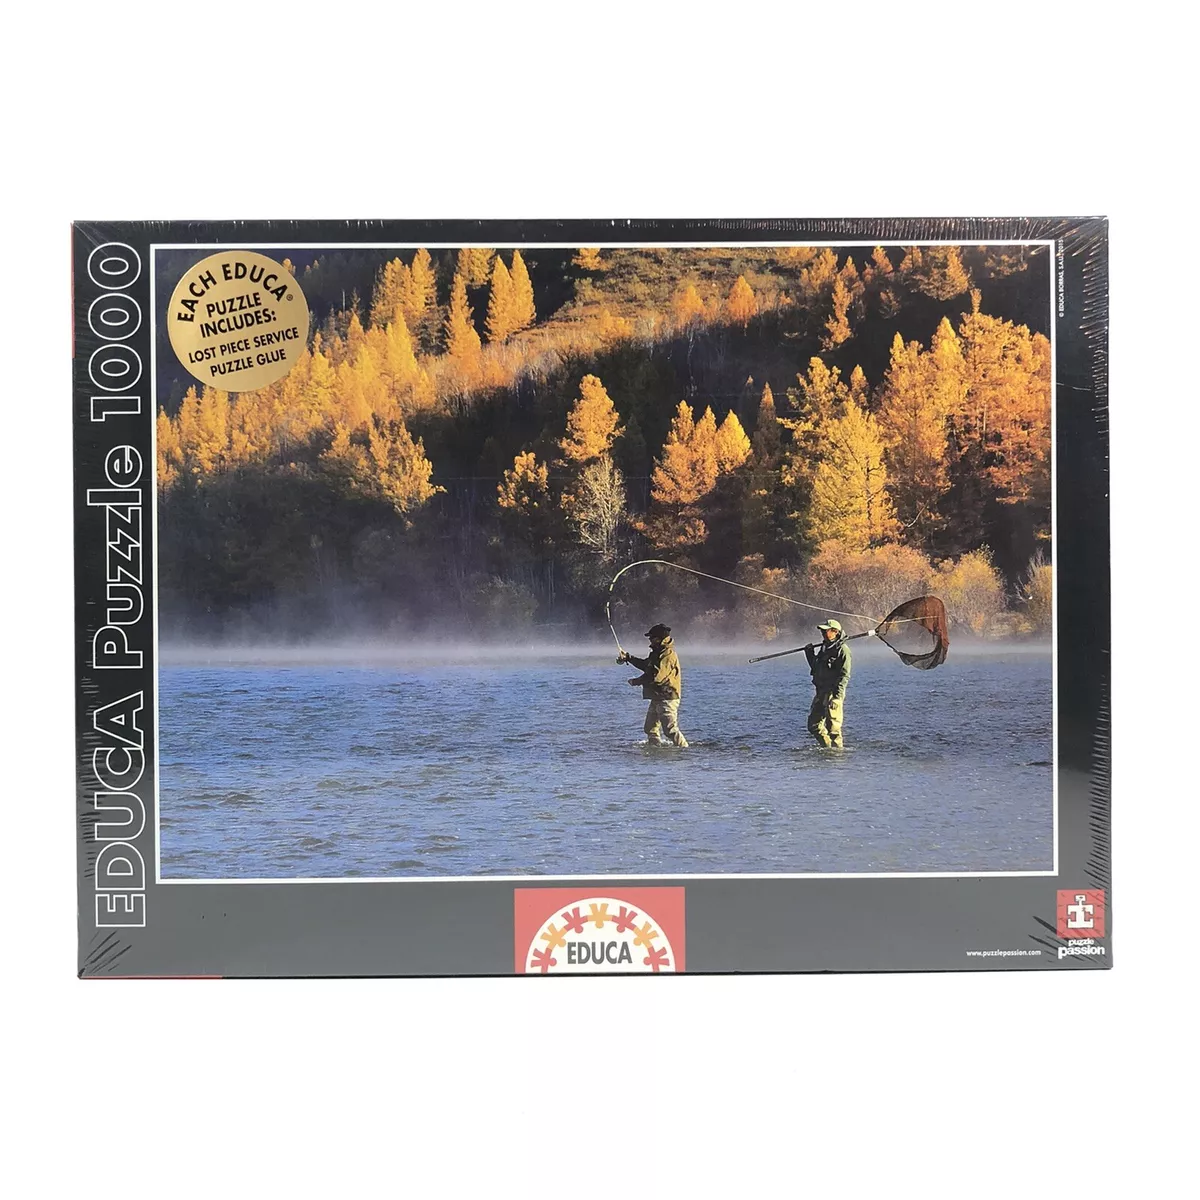 EDUCA 1000 Piece Jigsaw Puzzle Two Men Fly Fishing Scenic River New Sealed